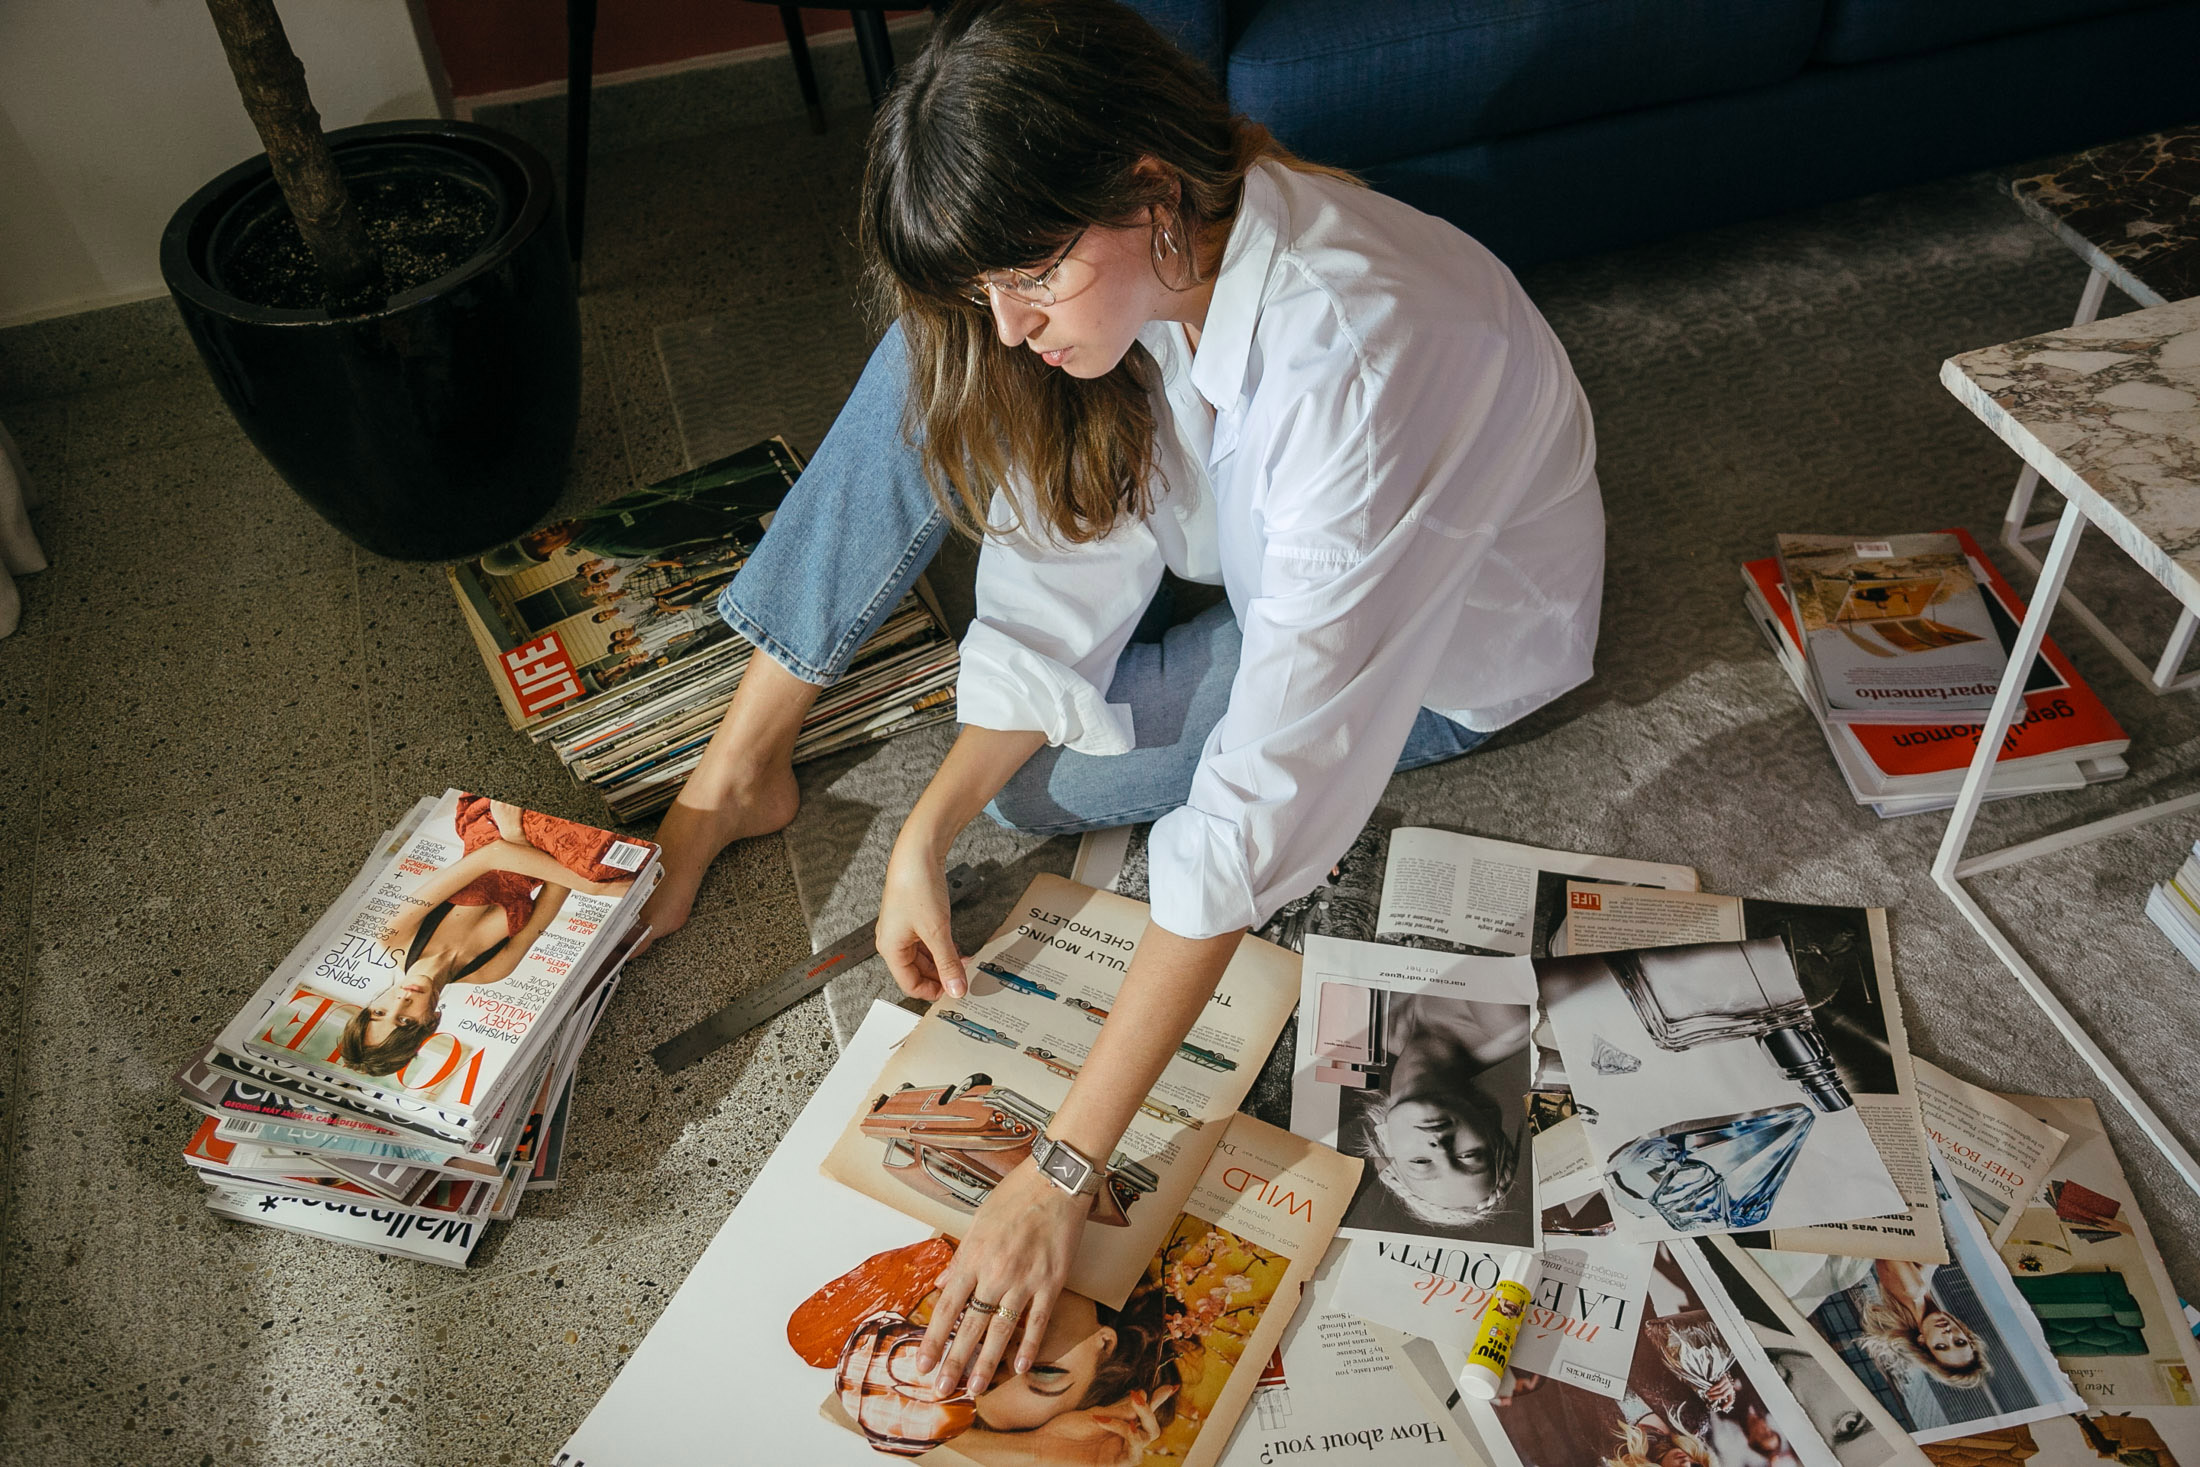 Maristella looks through vintage Life Magazines and fashion magazines for her collages